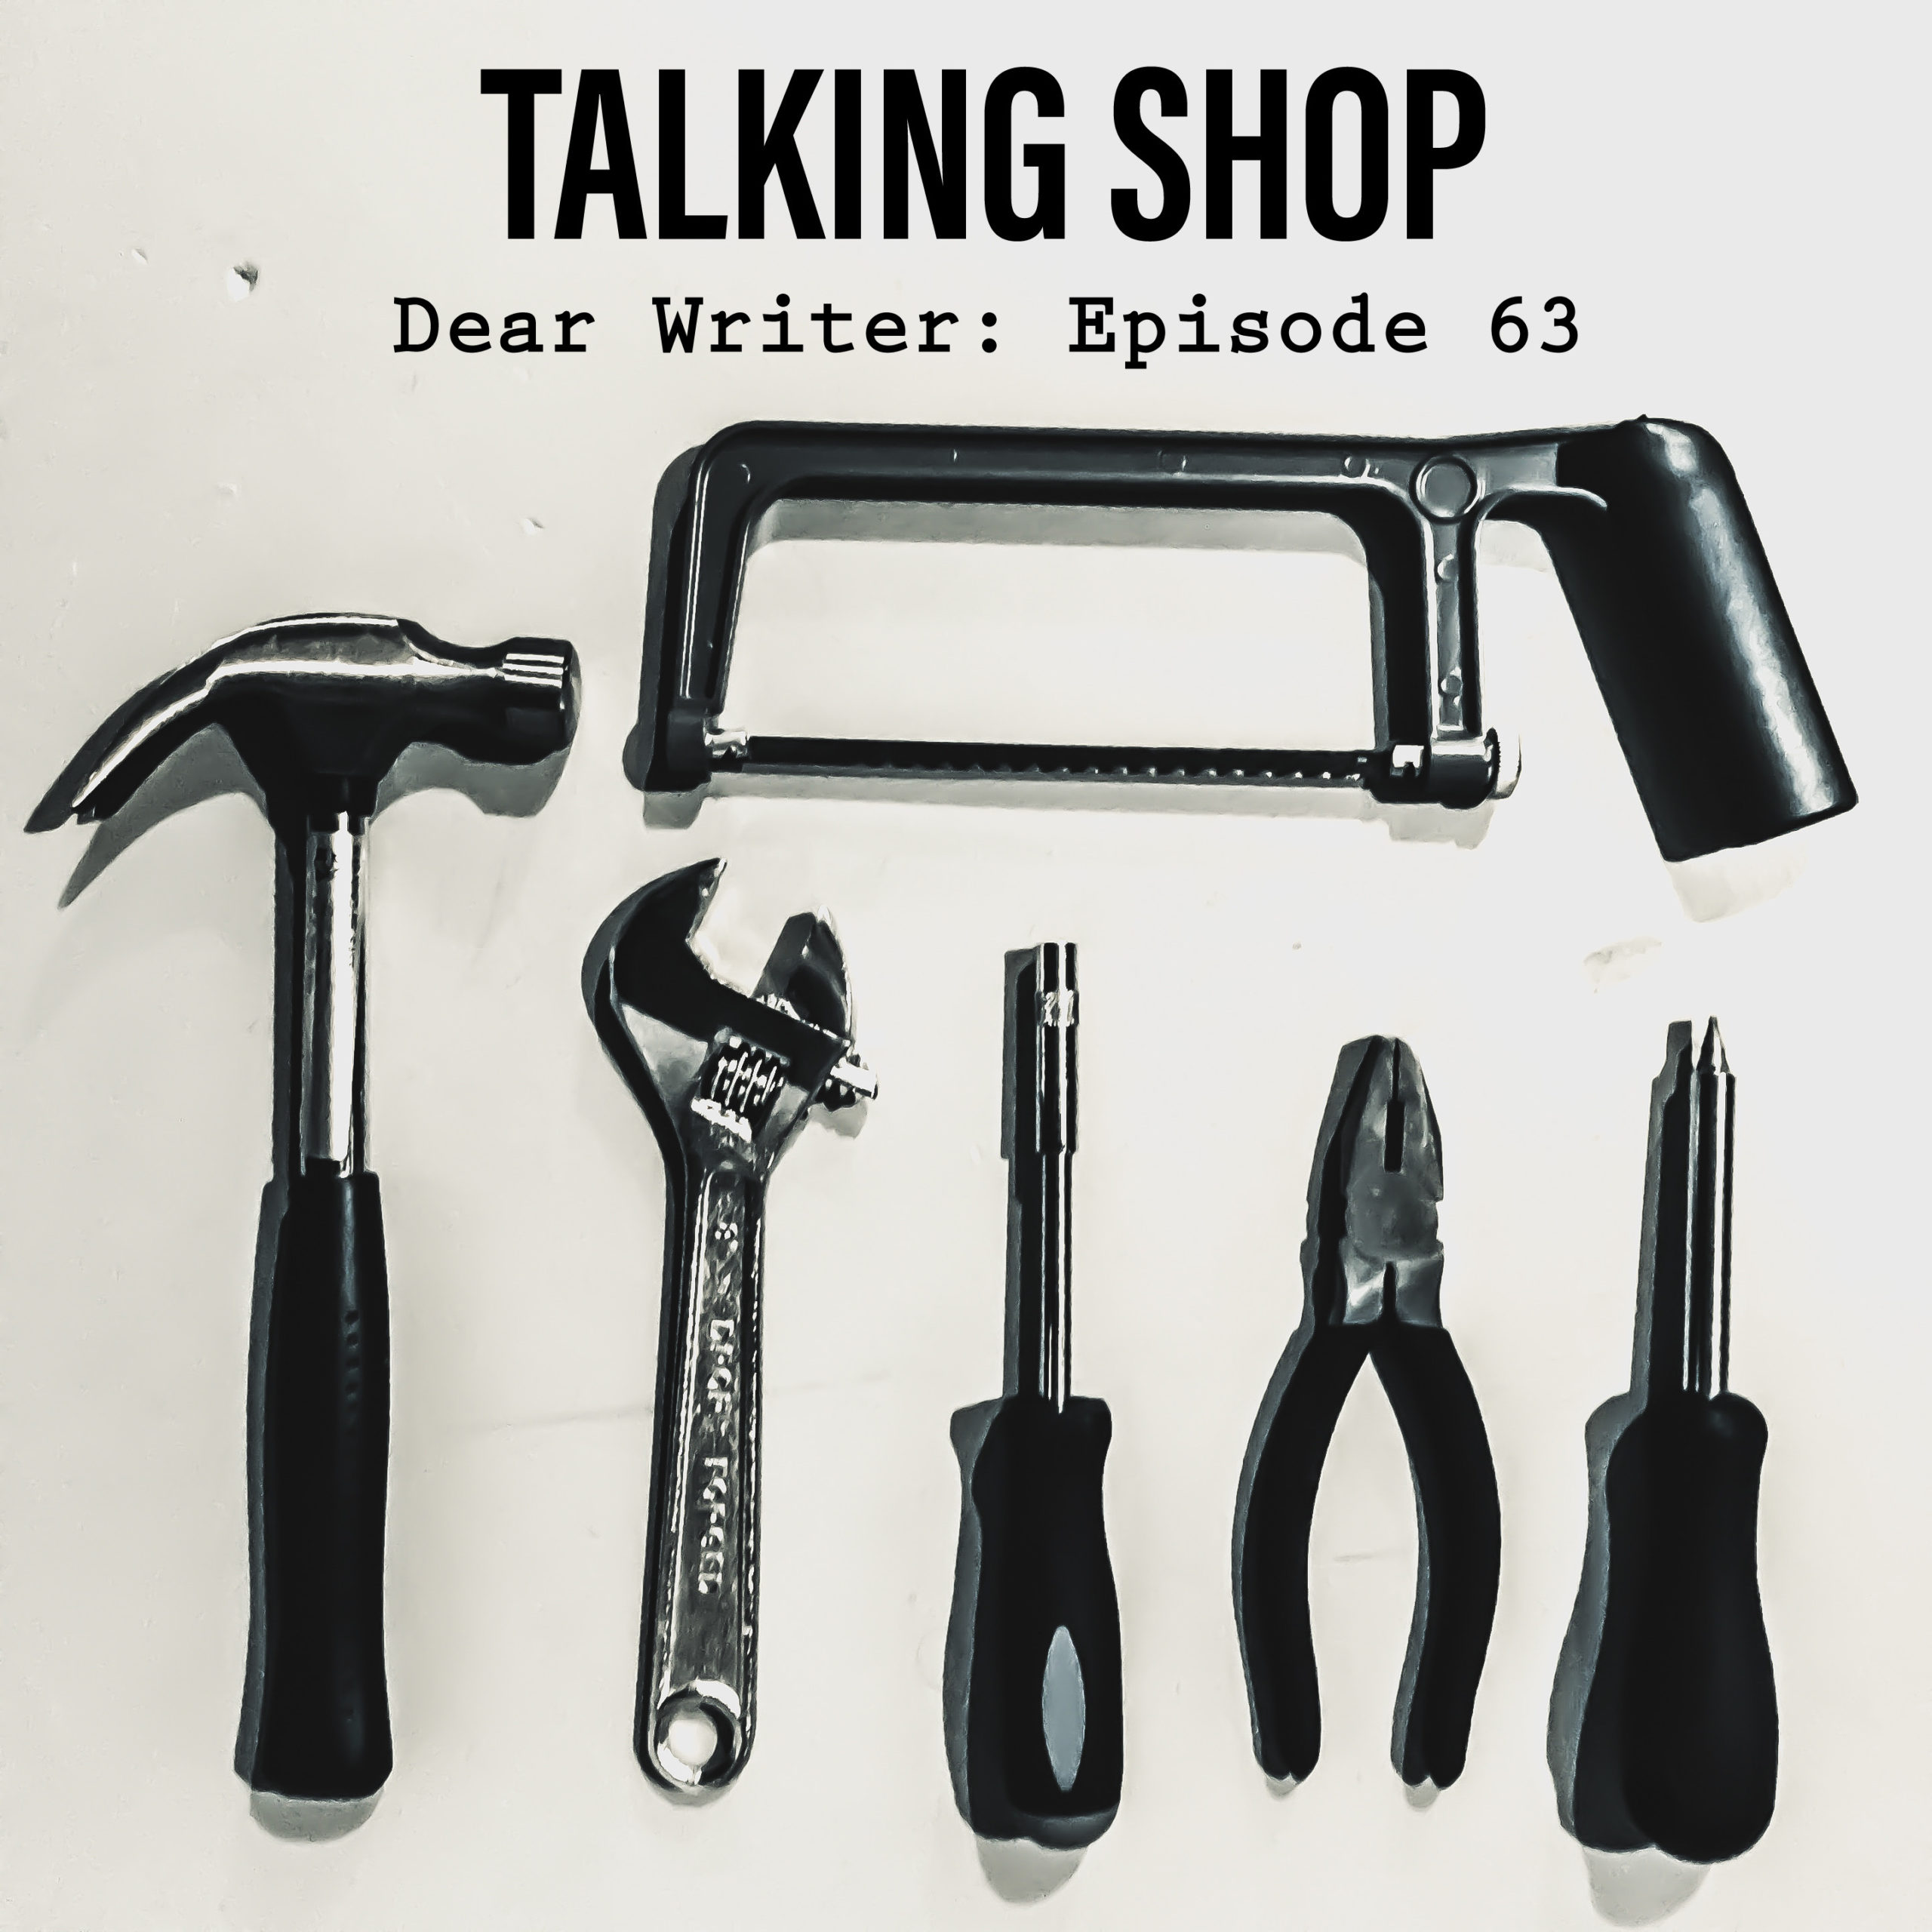 Episode 63 - Talking Shop - Eats, Shoots & Leaves and Writing for Emotional Impact